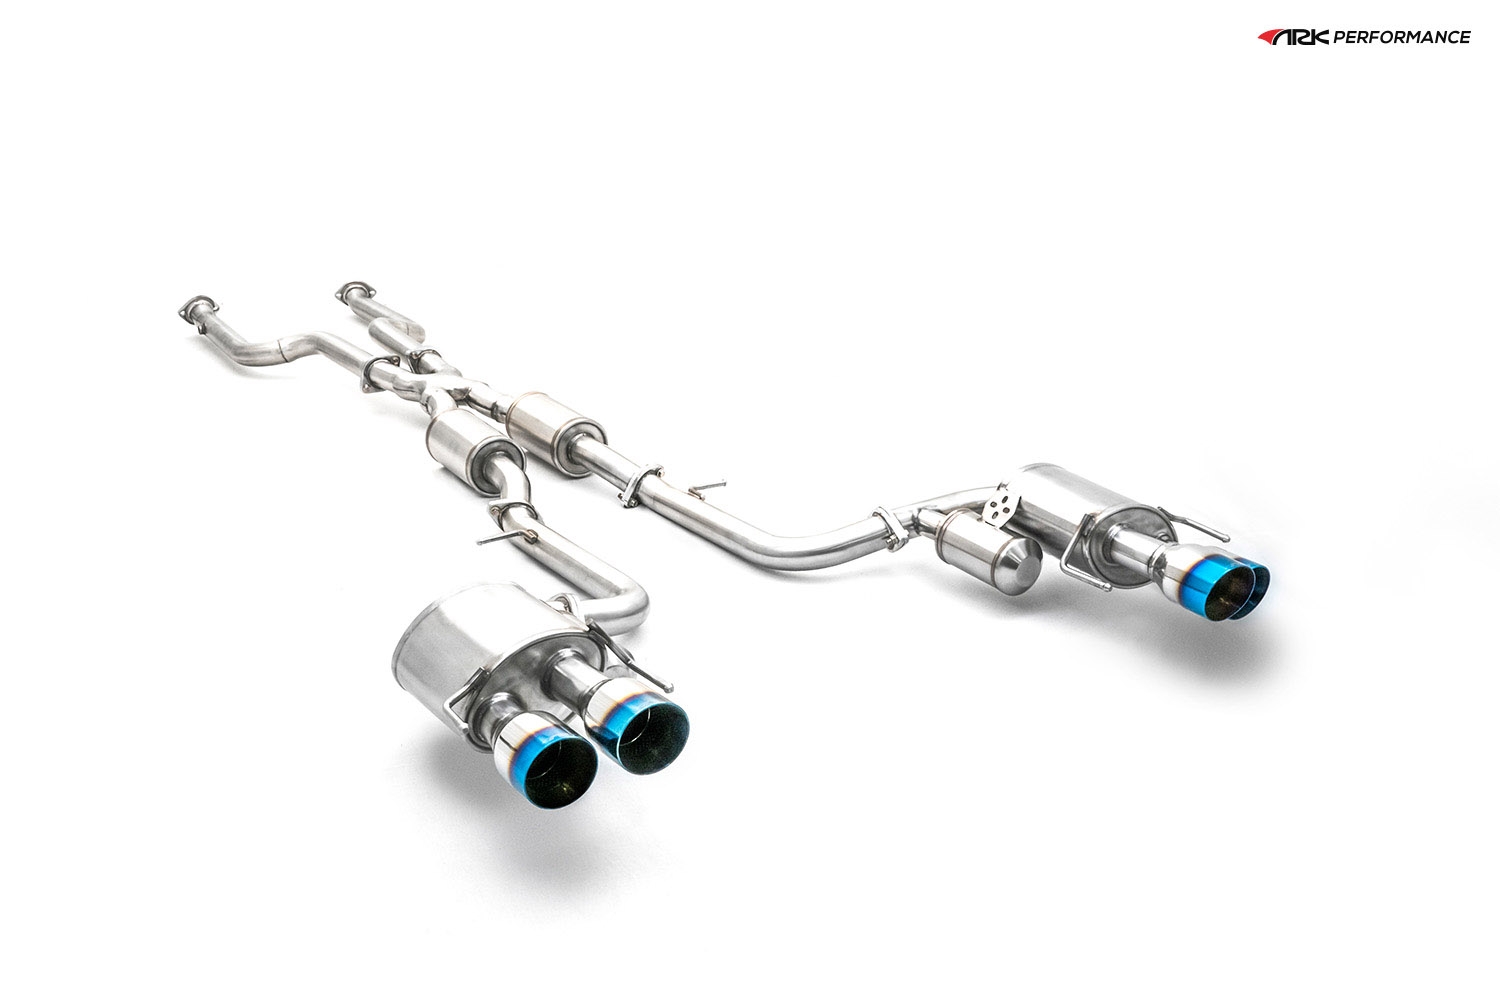 Ark Performance Stainless Steel GRiP Cat-Back Exhaust System 2.5in Pipe w/ 4.5 Burnt Quad Tip , Dual Exit - Lexus RC F 15+ 5.0L V8 USC10